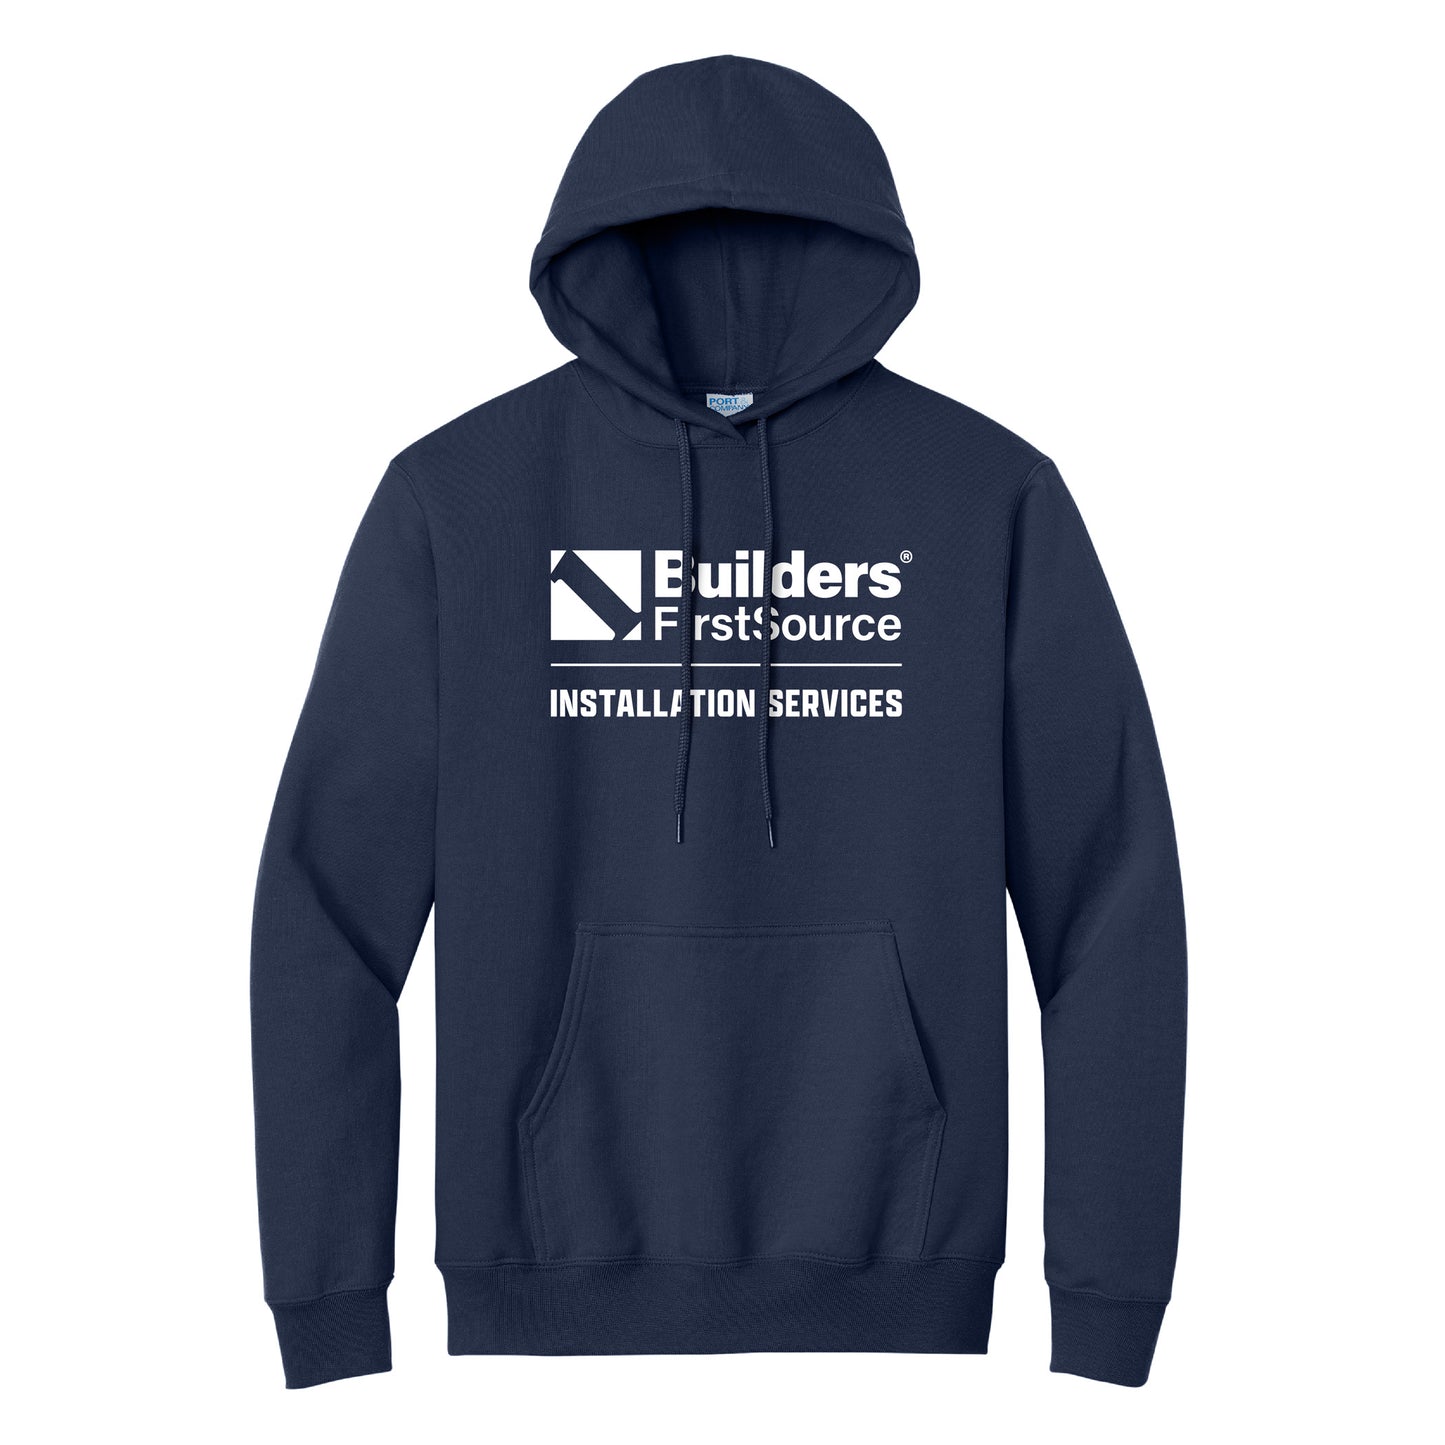 Installation Services - Ultimate Pullover Hooded Sweatshirt